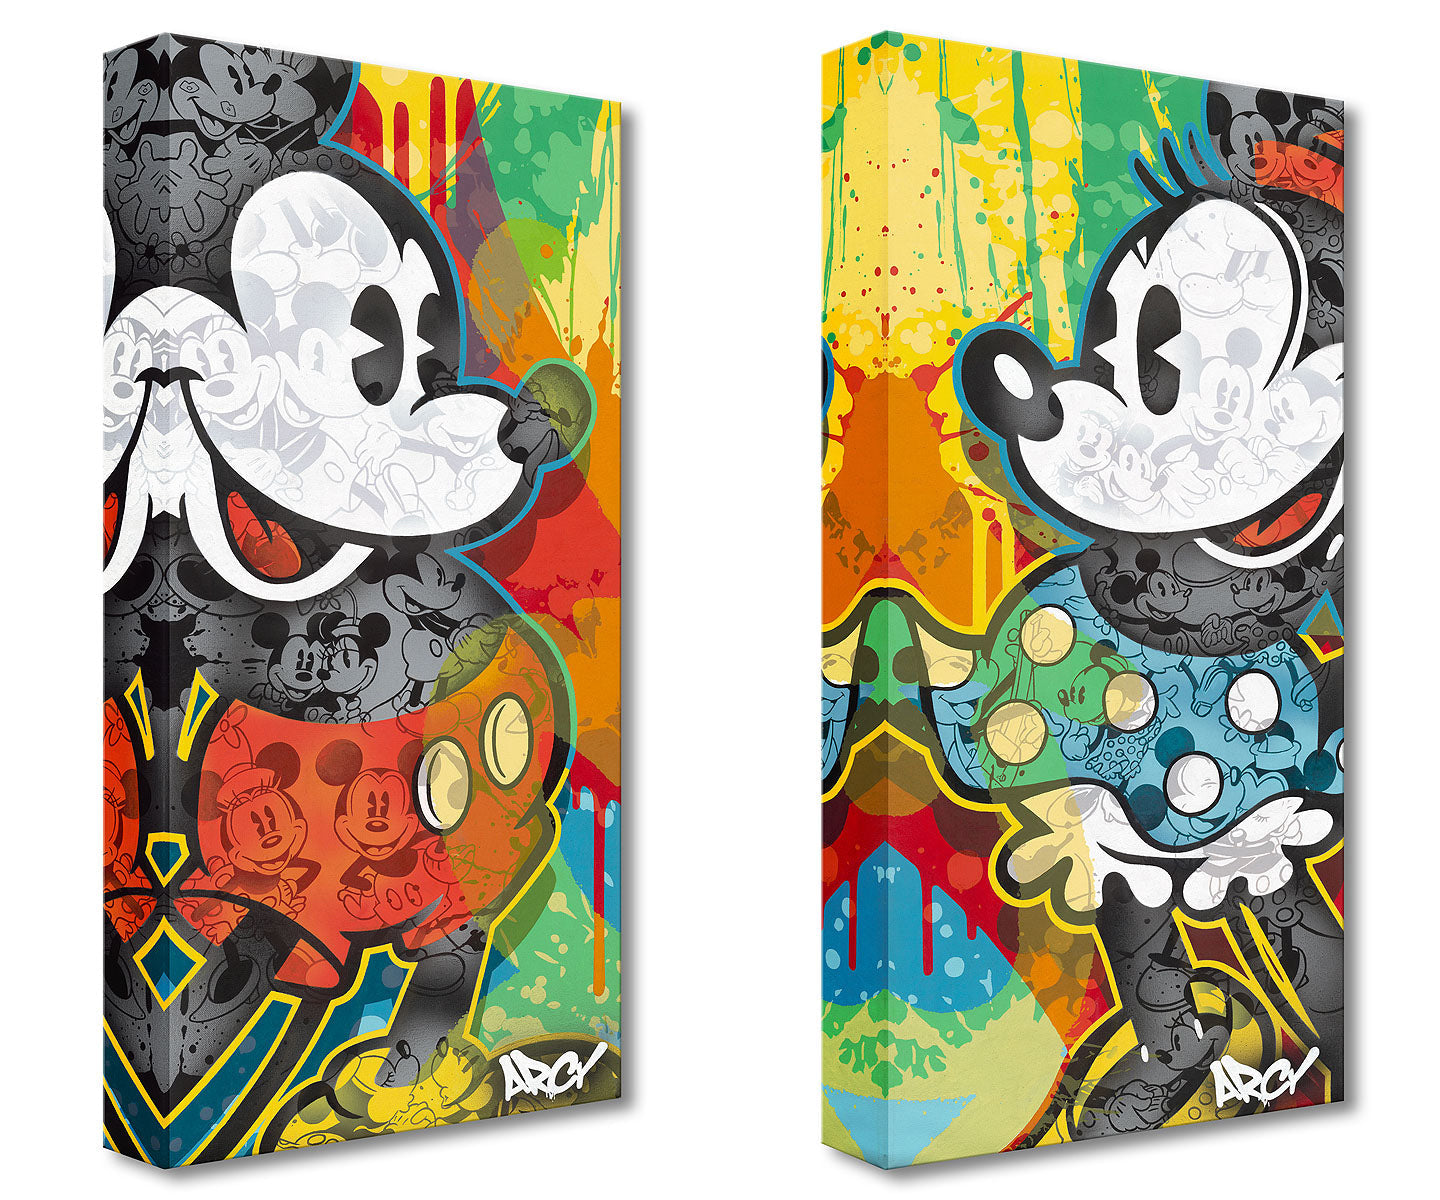 2 LOT Mickey Mouse and Minnie Mouse Walt Disney Fine Art by ARCY Limited Edition of 1500 TOC Treasures on Canvas Print "I'll Be Your"